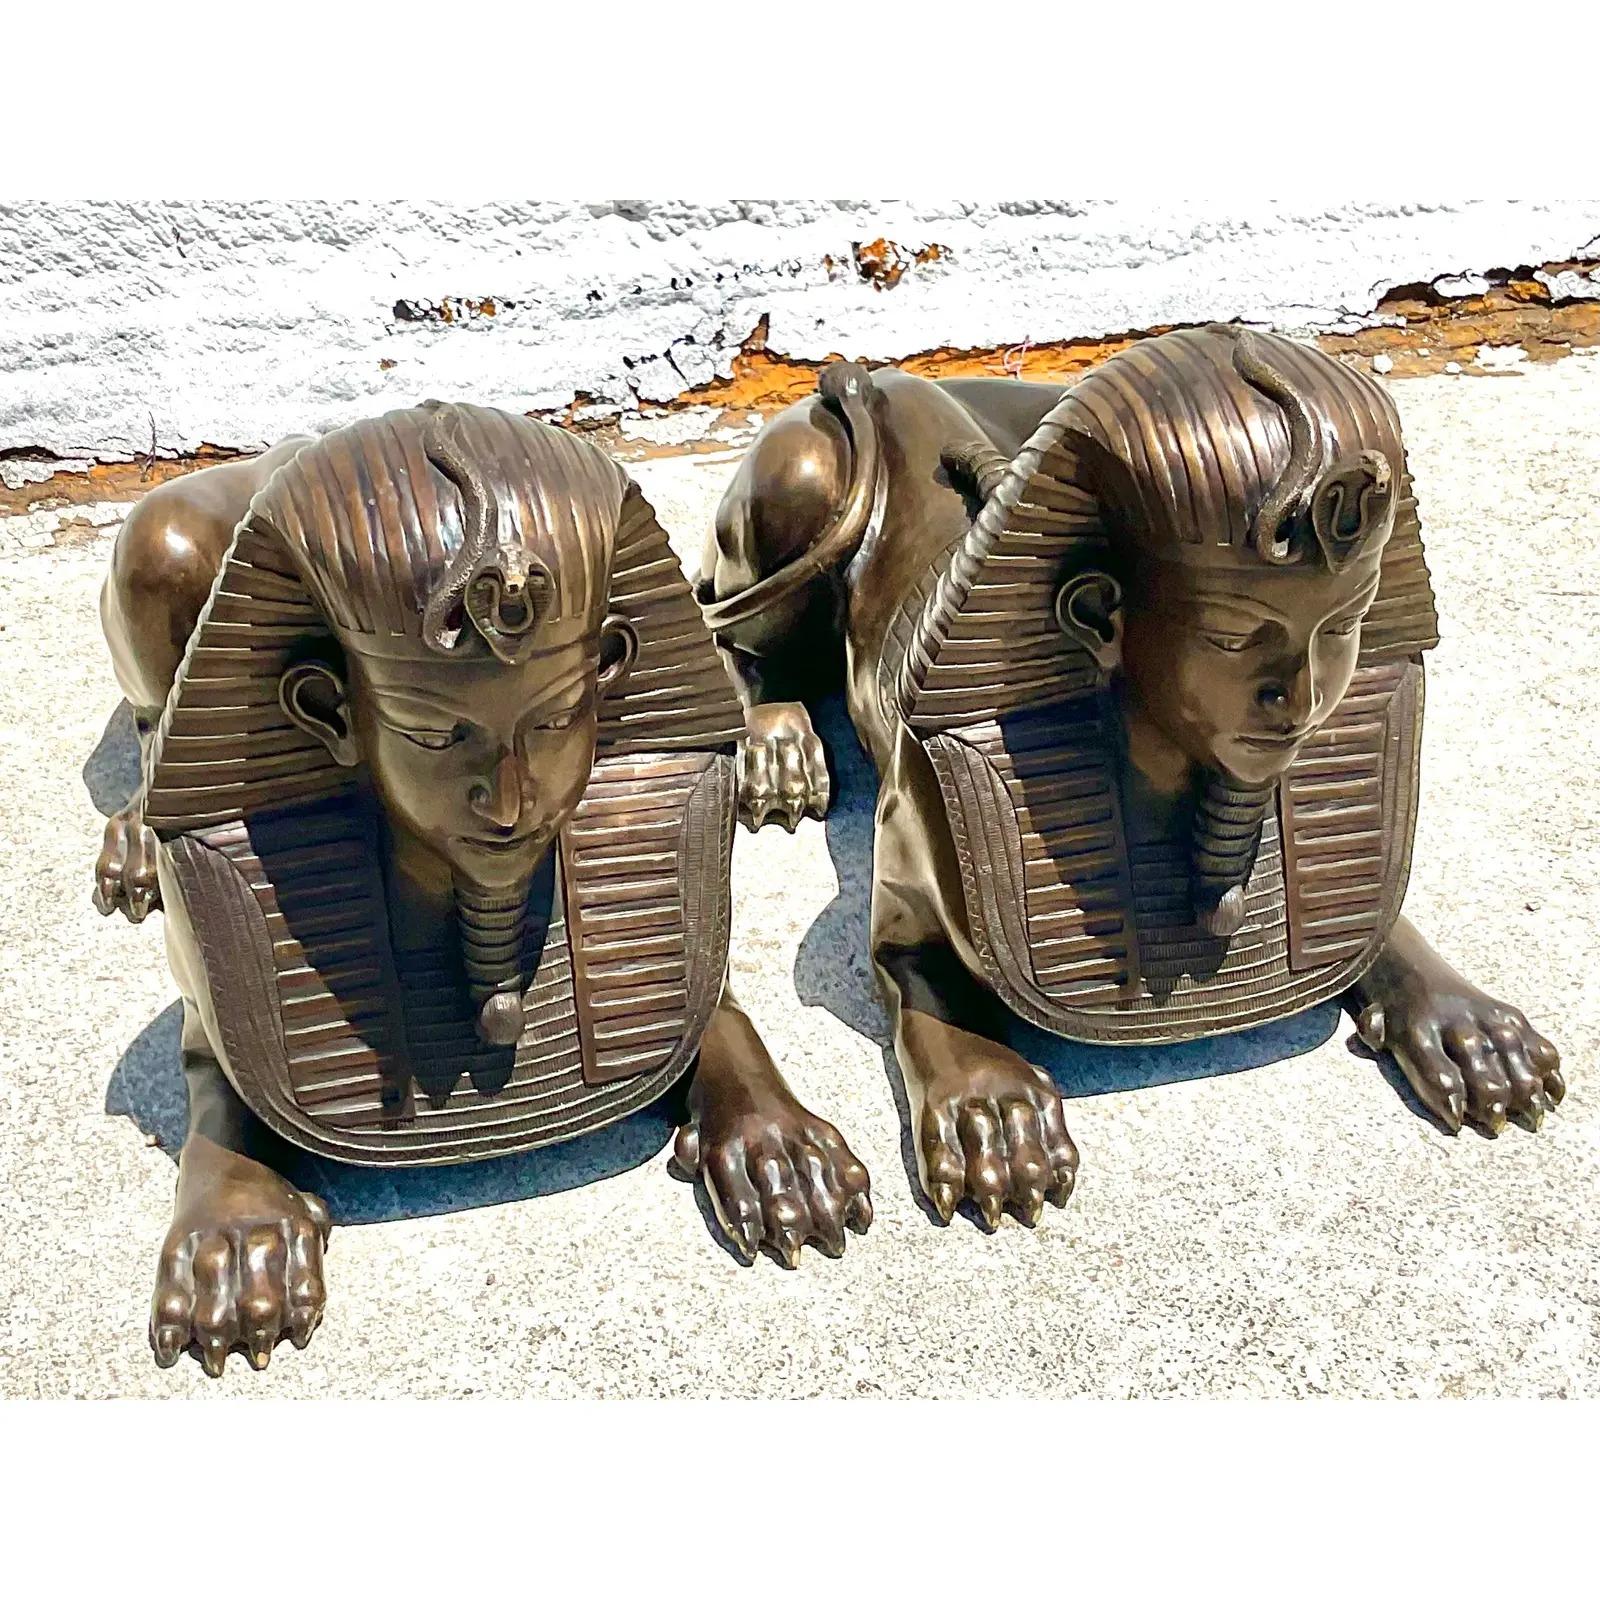 Fantastic pair of vintage bronze sculptures. A magnificent pair of monumental sphinxes. Massive and dramatic. Perfect to add some glamour and drama to any entrance or doorway. Acquired from a Naples estate.